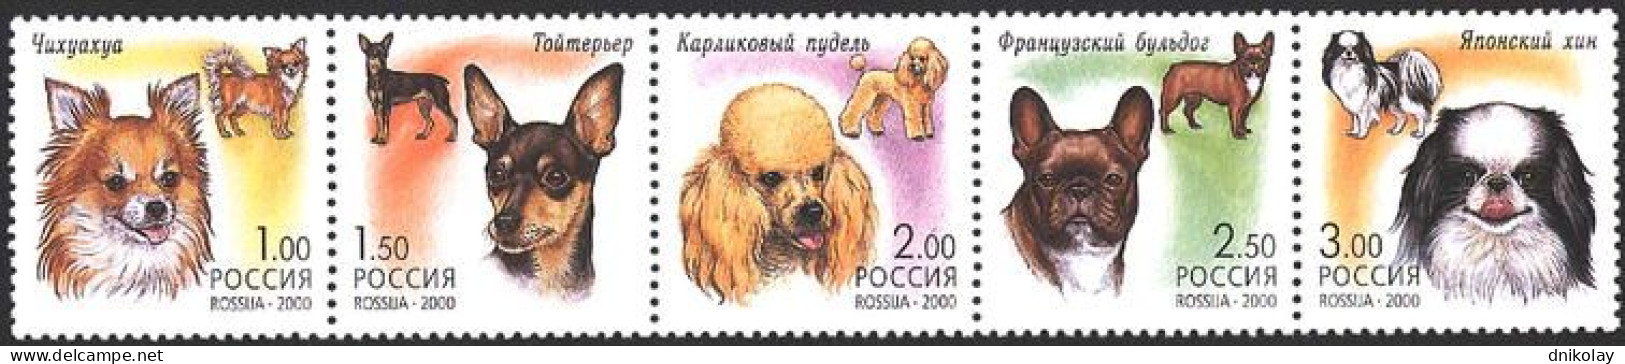 2000 831 Russia Decorative Dogs MNH - Unused Stamps